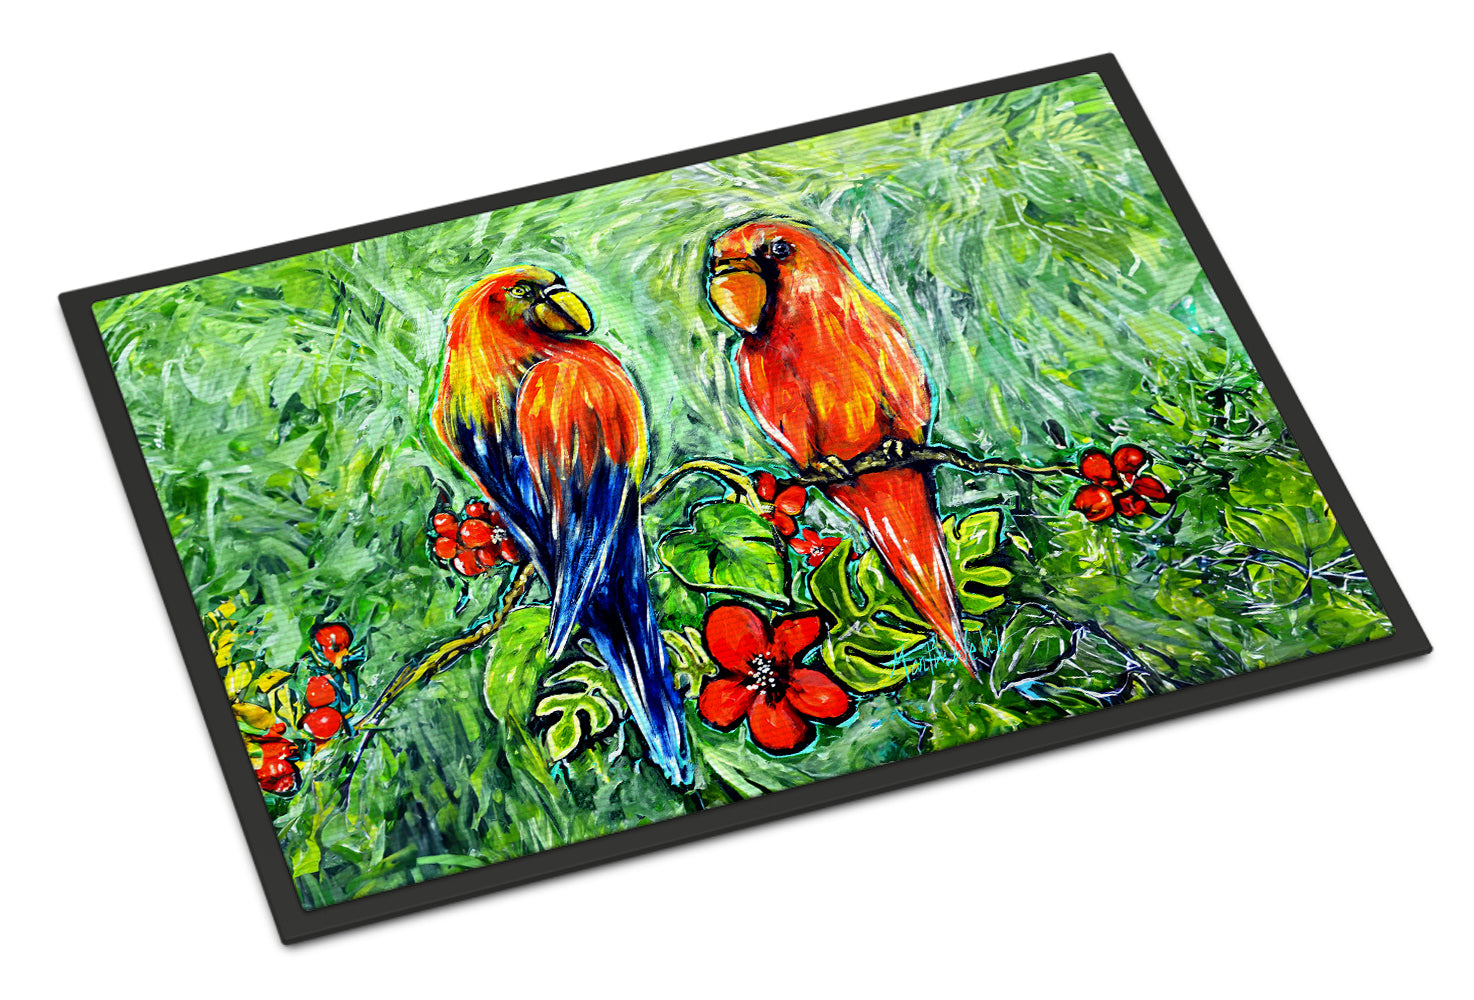 Buy this Fred and Freda Parrots Doormat